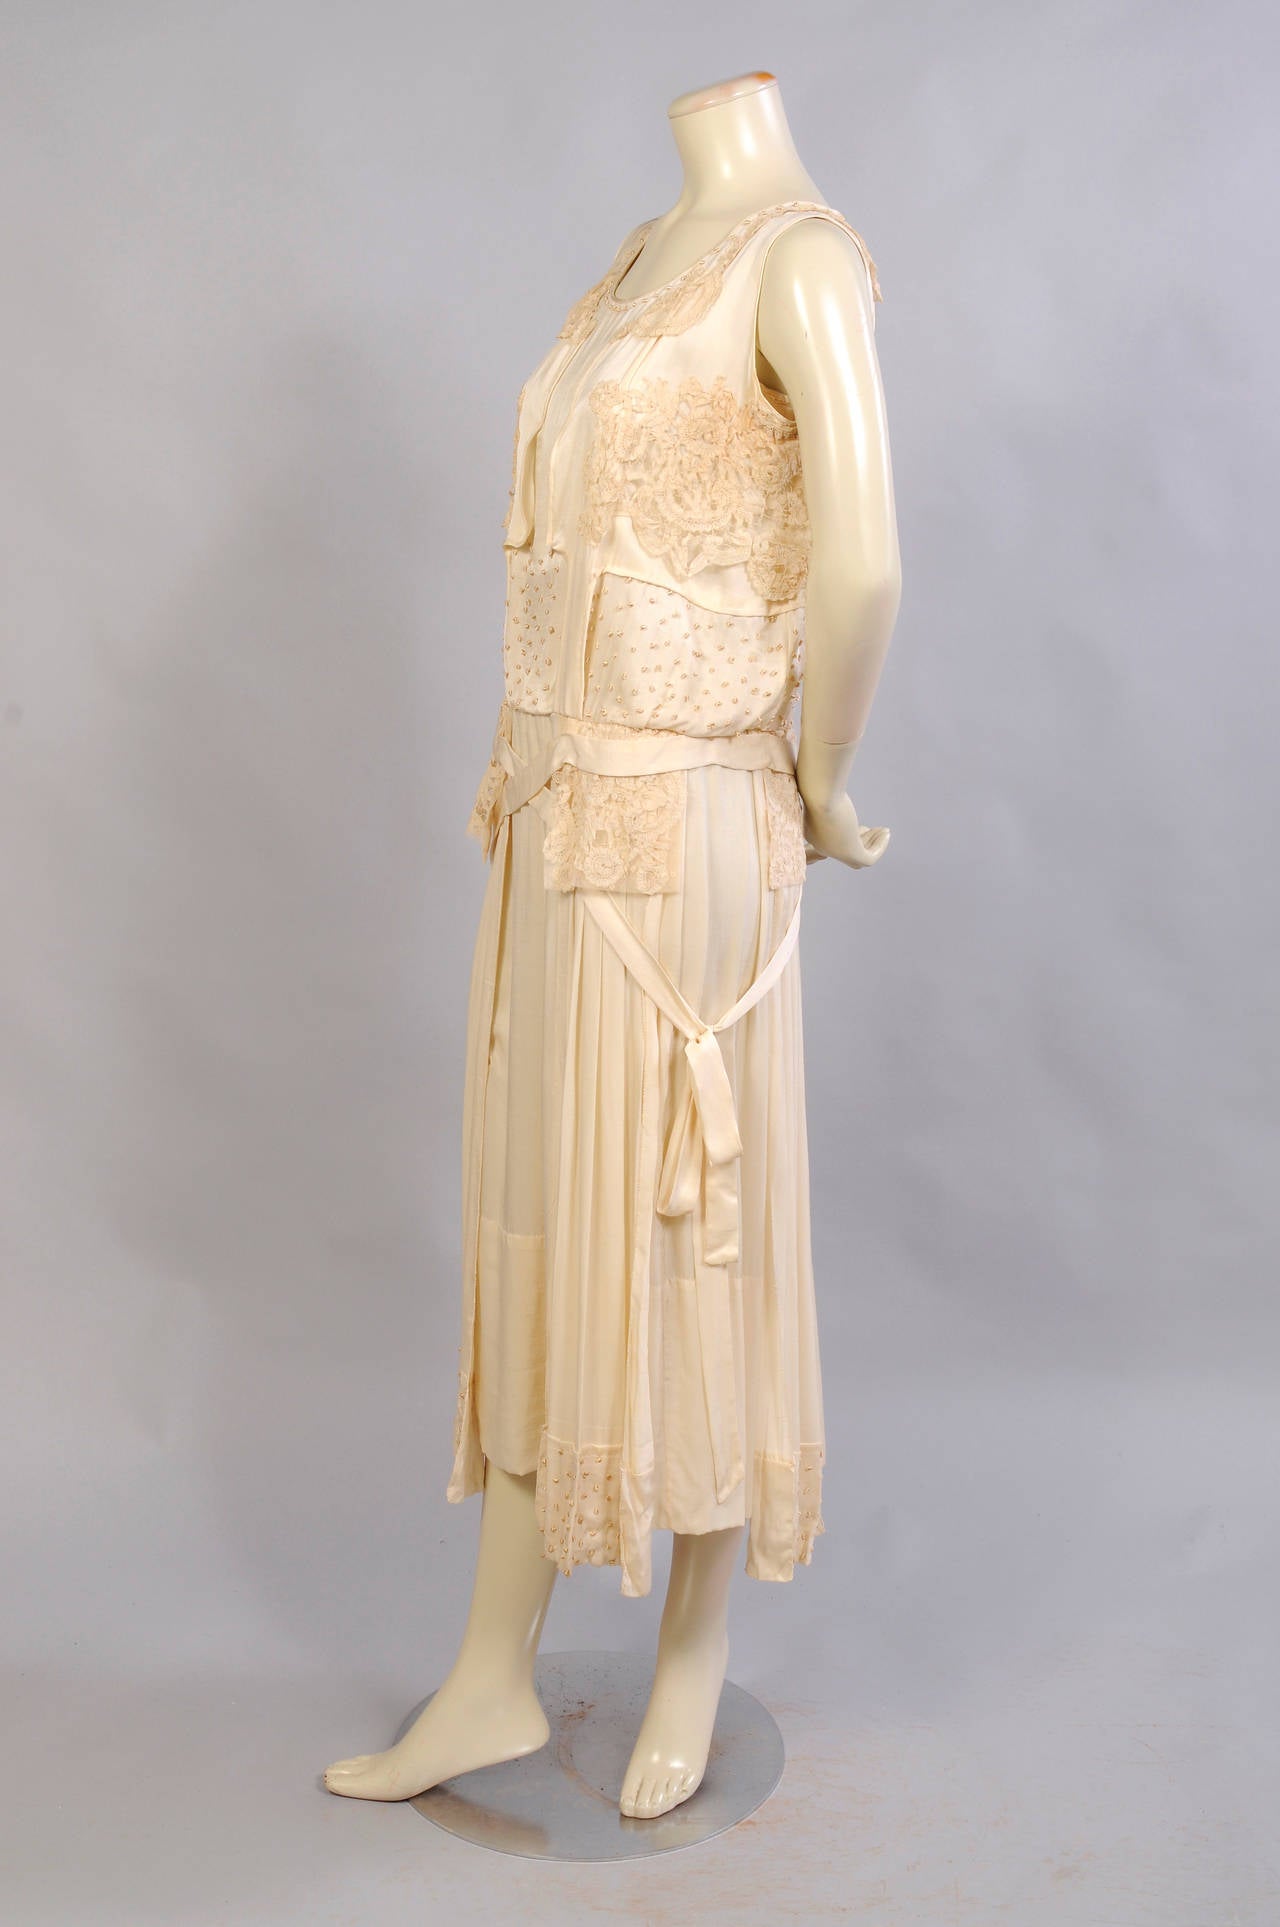 This 1920's silk dress has so many interesting design elements. There are silk French knots at the neckline as well as tape lace panels.
Rows of French knots are sewn above the waistline and more lace sits atop the pleated panels on the hips. These